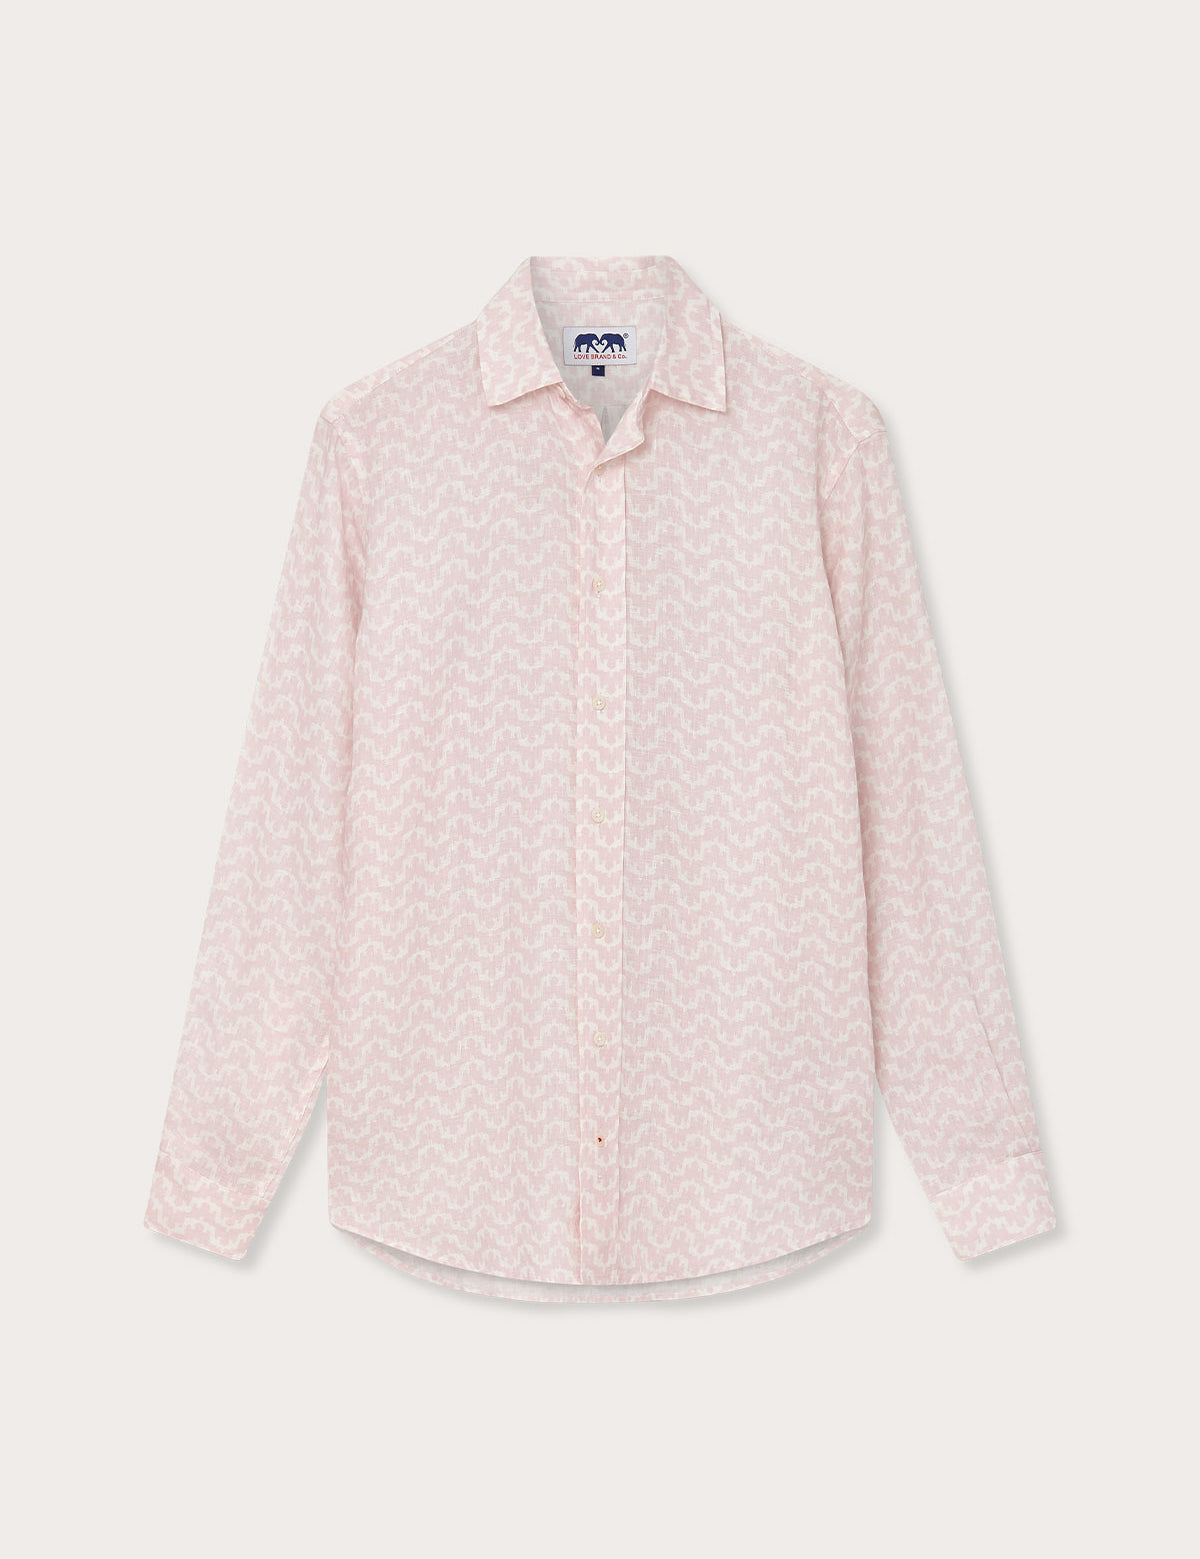 Men's Elephant Palace Pink Abaco Linen Shirt hanging on a white background, featuring a light pink color with subtle patterns, long sleeves, and a collar.